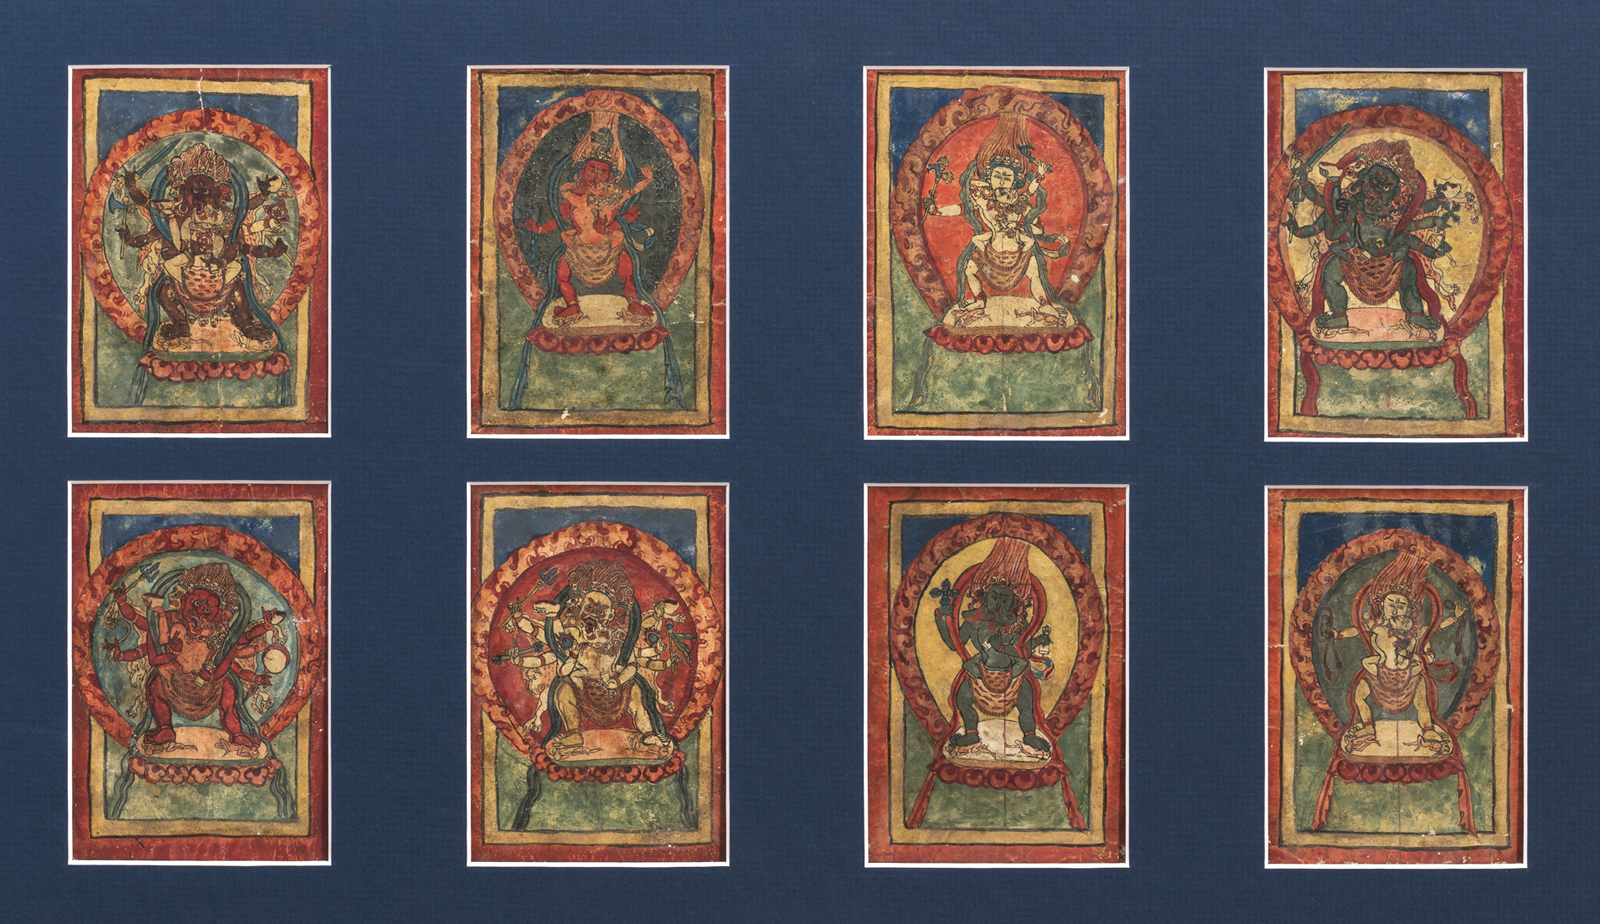 Collection of 50 Tsakli Painting Buddhist Teaching Cards from Tibet